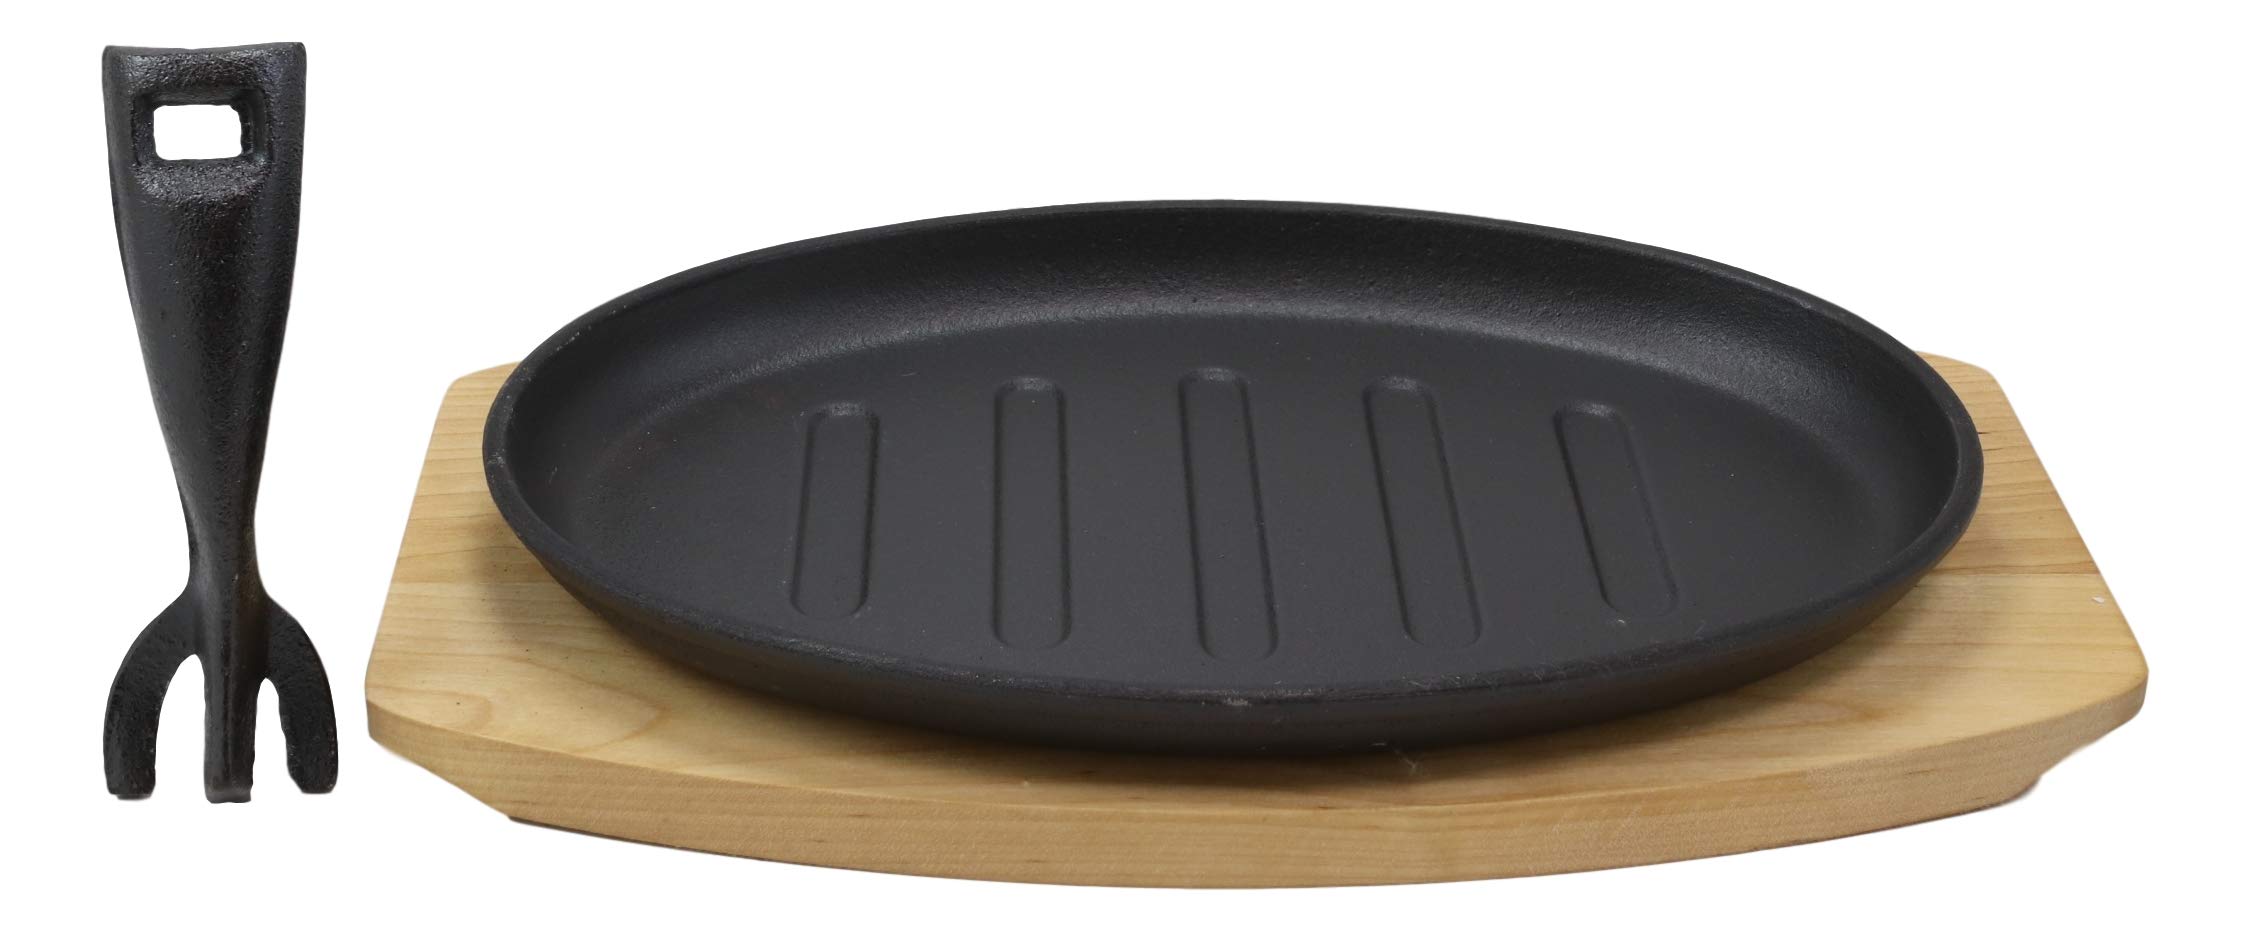 Ebros Personal Size 10.5" By 7" Enamel Coated Cast Iron Sizzling Fajita Skillet Ridged Japanese Steak Plate With Handle and Wood Base For Restaurant Home Kitchen Cooking Pan Grilling Meats Seafood